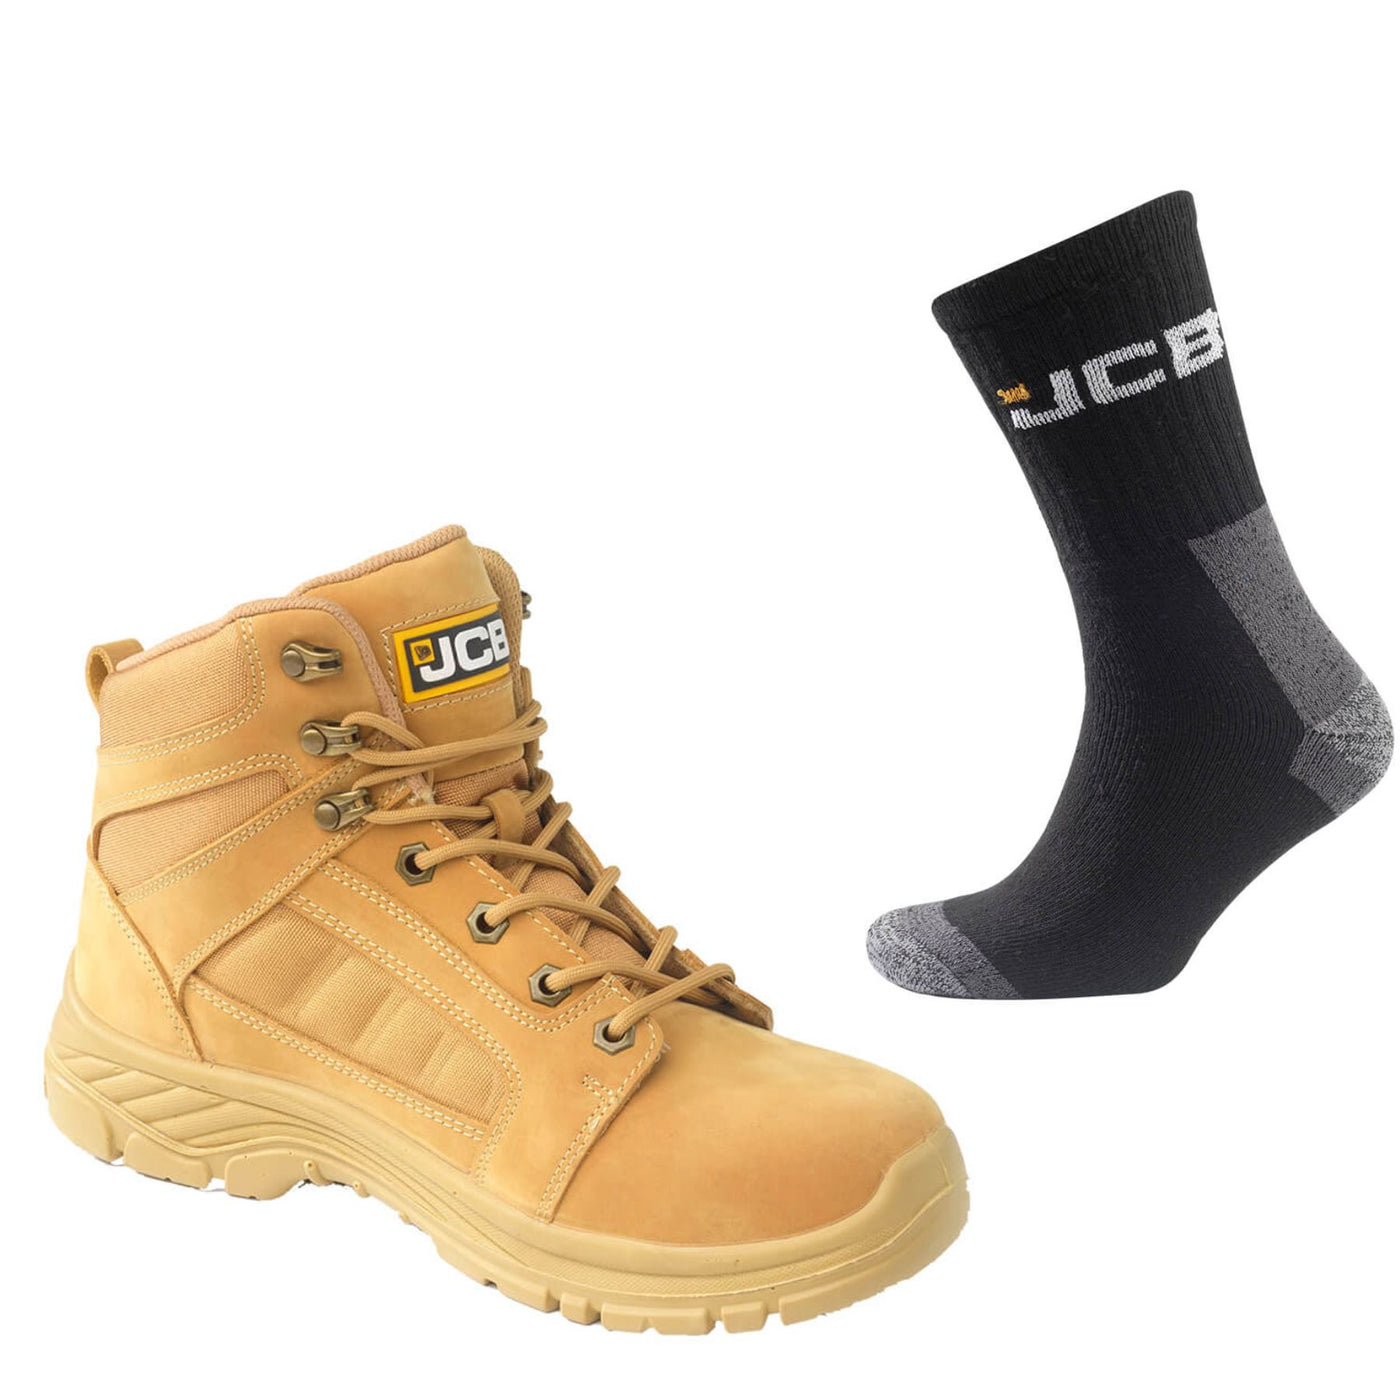 JCB Loadall Special Offer Pack - JCB Loadall Safety Work Boots + 3 Pairs Work Socks